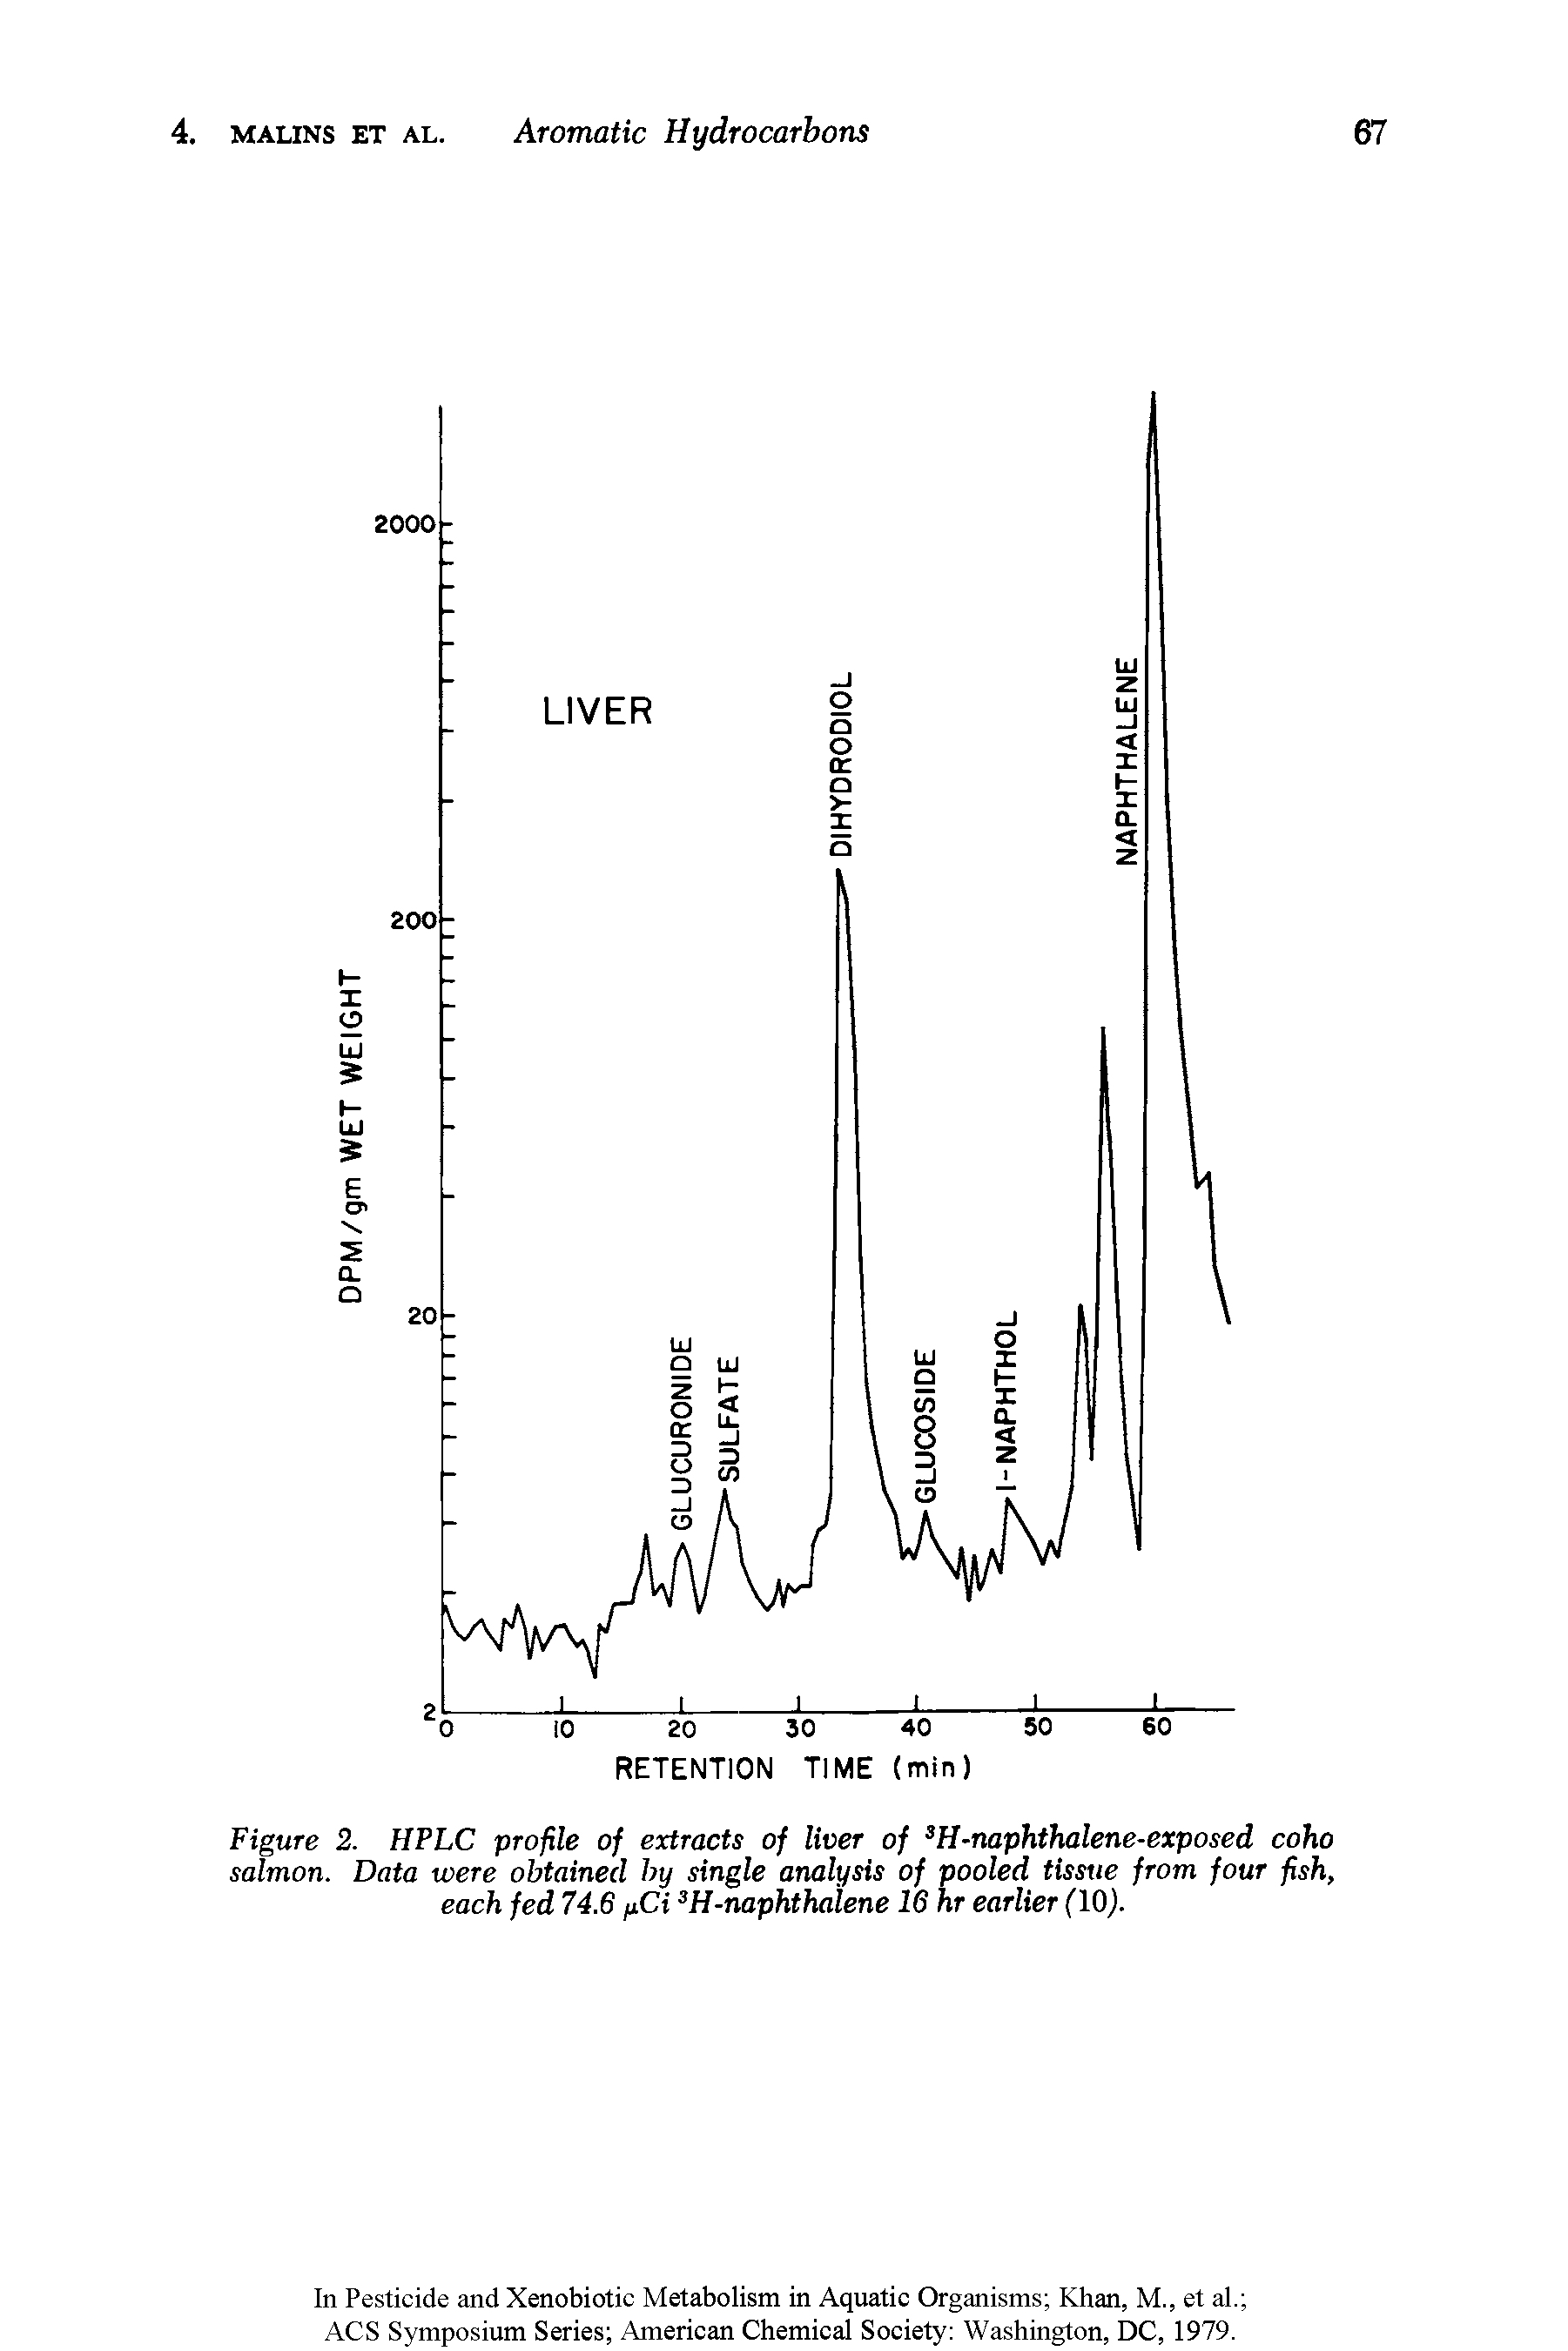 Figure 2. HPLC profile of extracts of liver of 3H-naphthalene-exposed coho salmon. Data were obtained by single analysis of pooled tissue from four fish, each fed 74.6 fid 3H-naphthalene 16 hr earlier (lO).